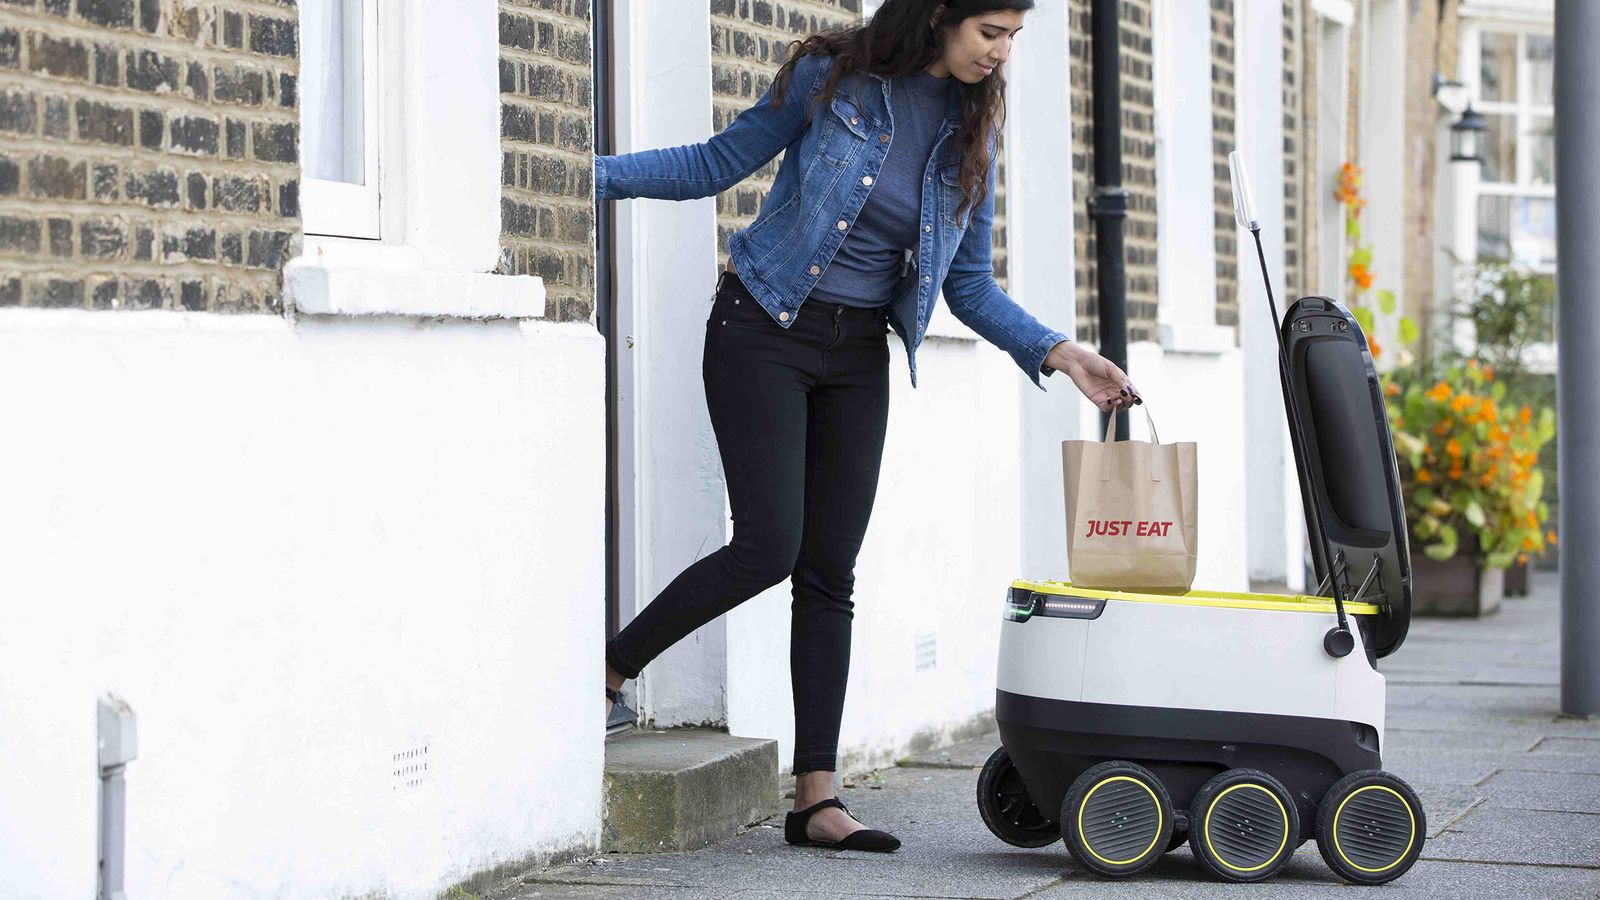 The new workforce model: Say hello to the robot at your doorstep